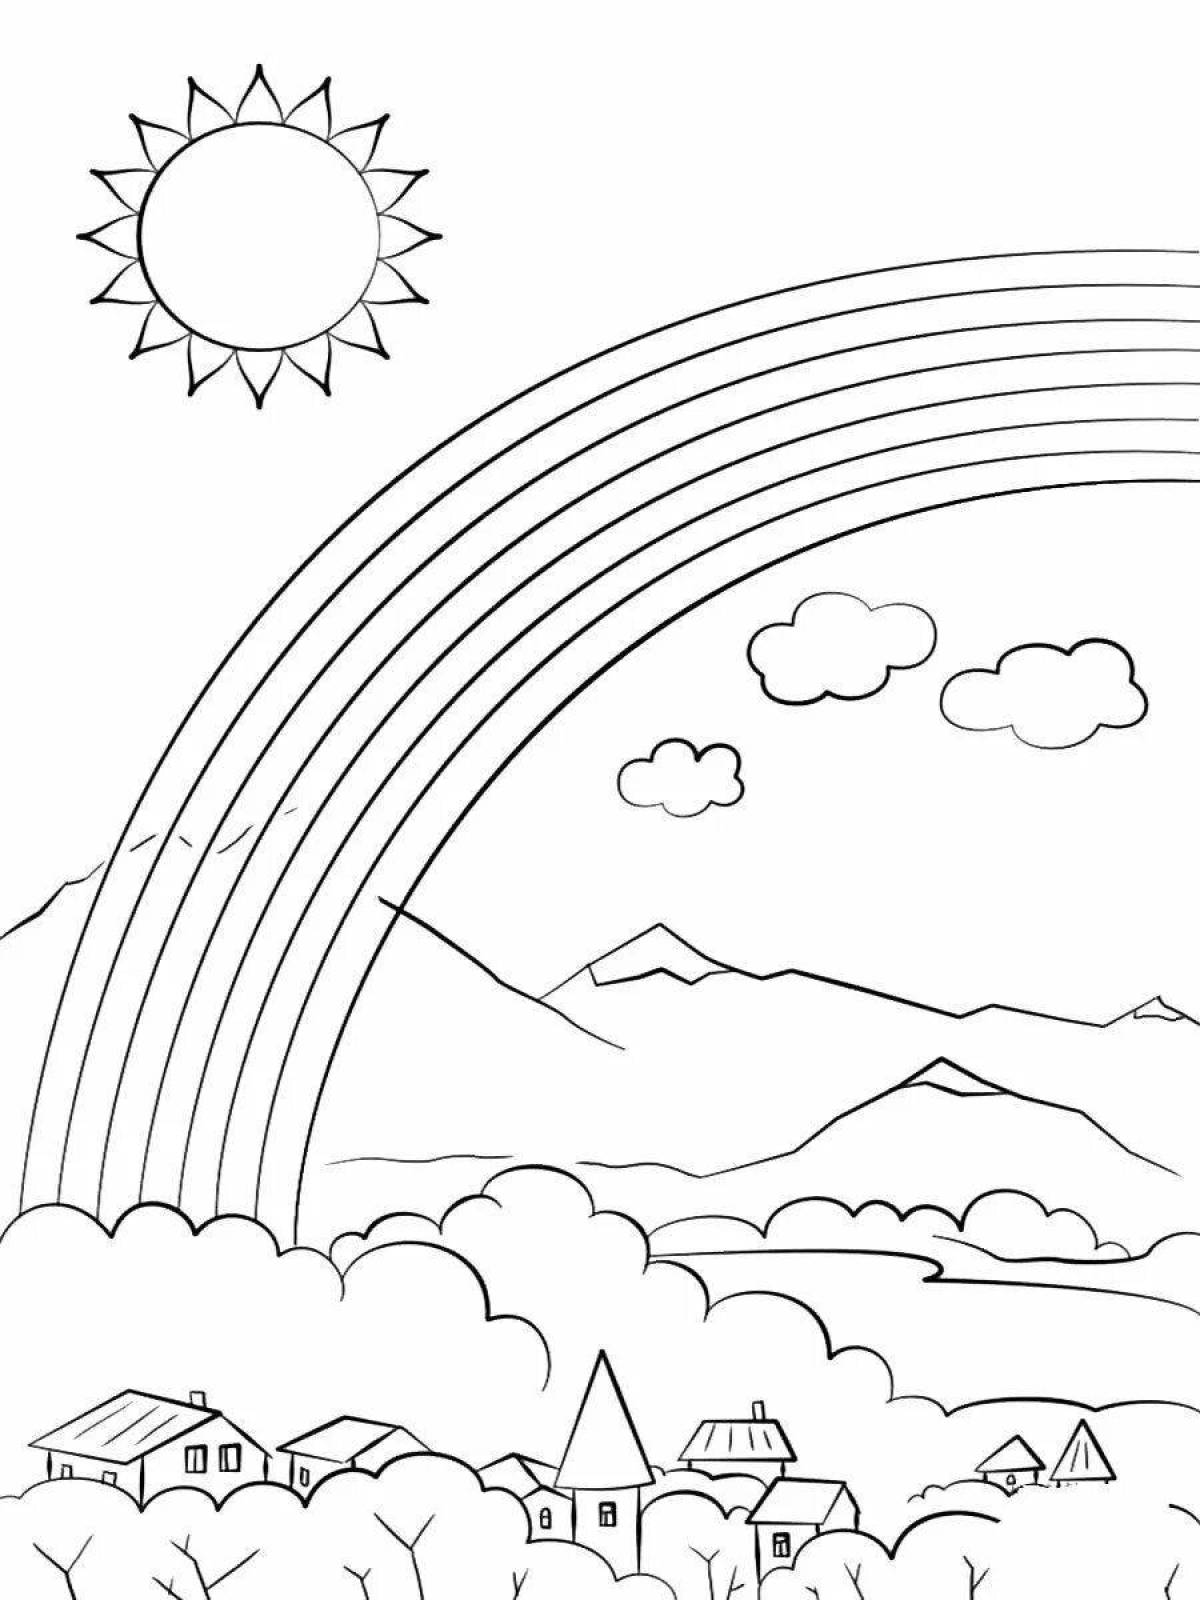 Coloring page dazzling rainbow house